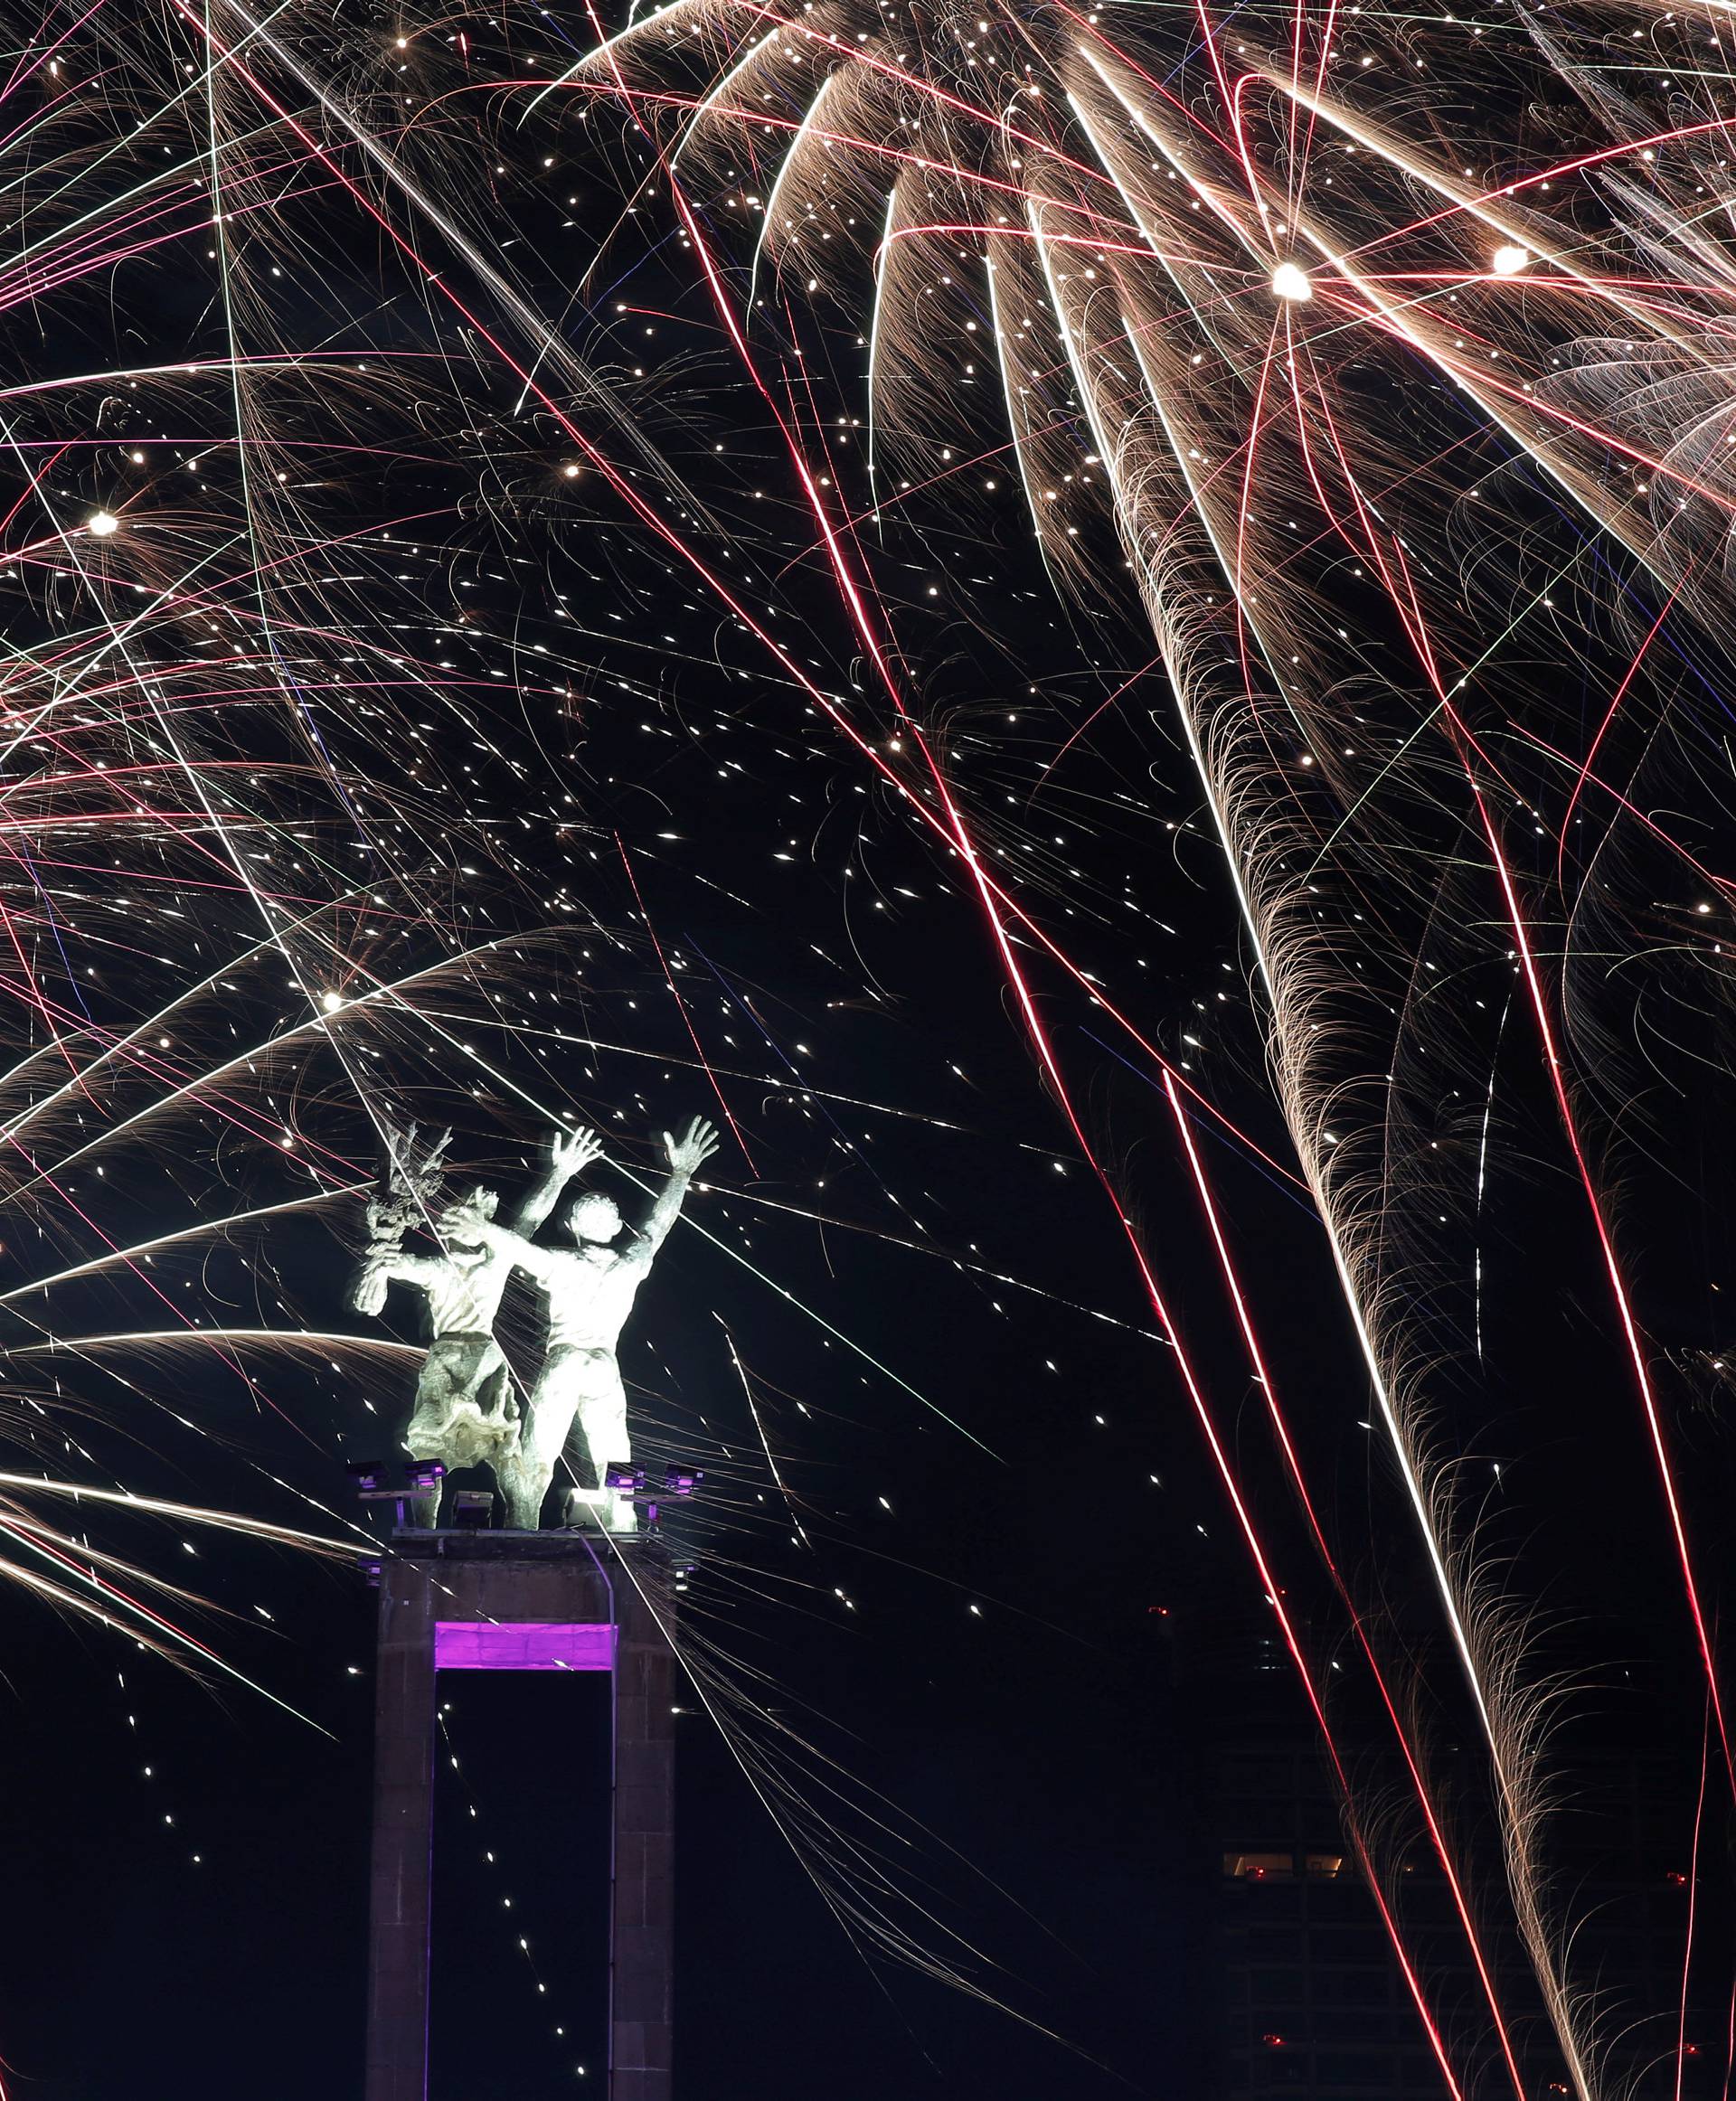 Fireworks explode around the Selamat Datang Monument during New Year's Eve celebrations in Jakarta